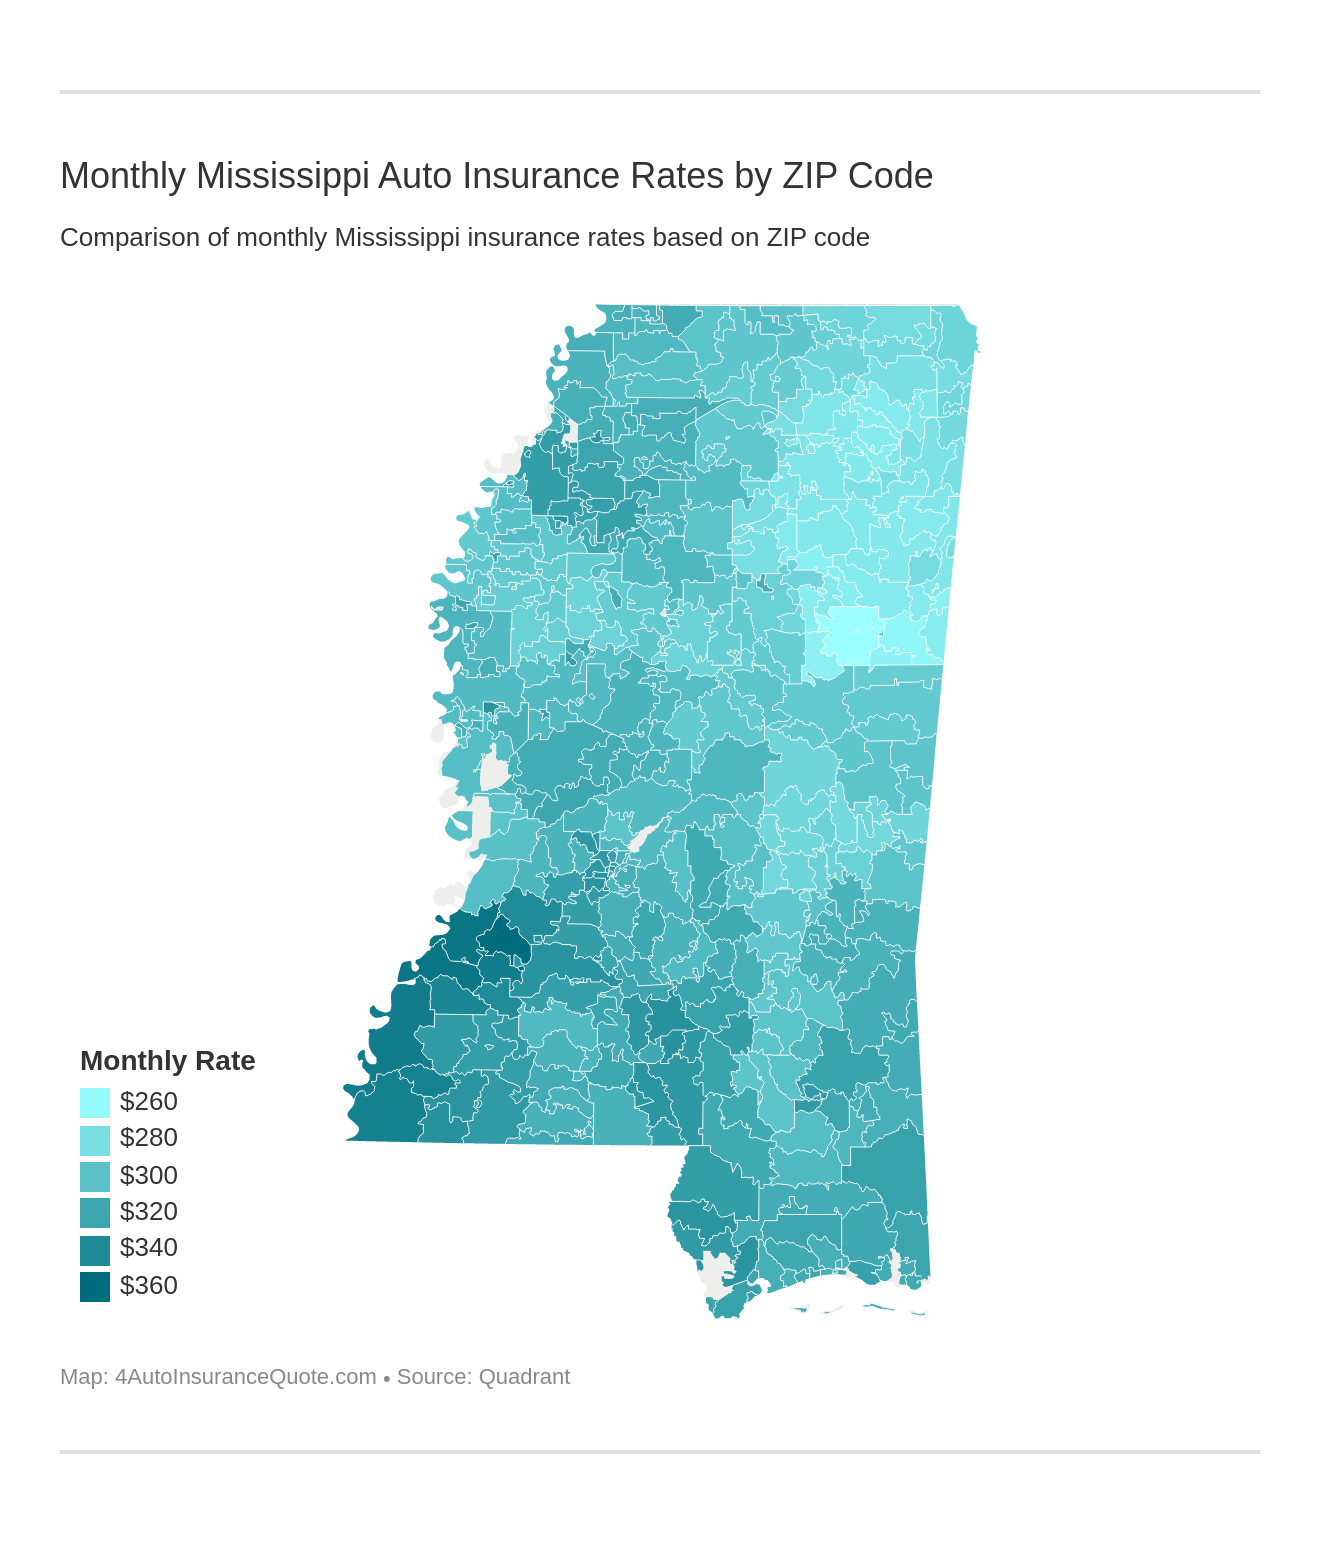 Monthly Mississippi Auto Insurance Rates by ZIP Code